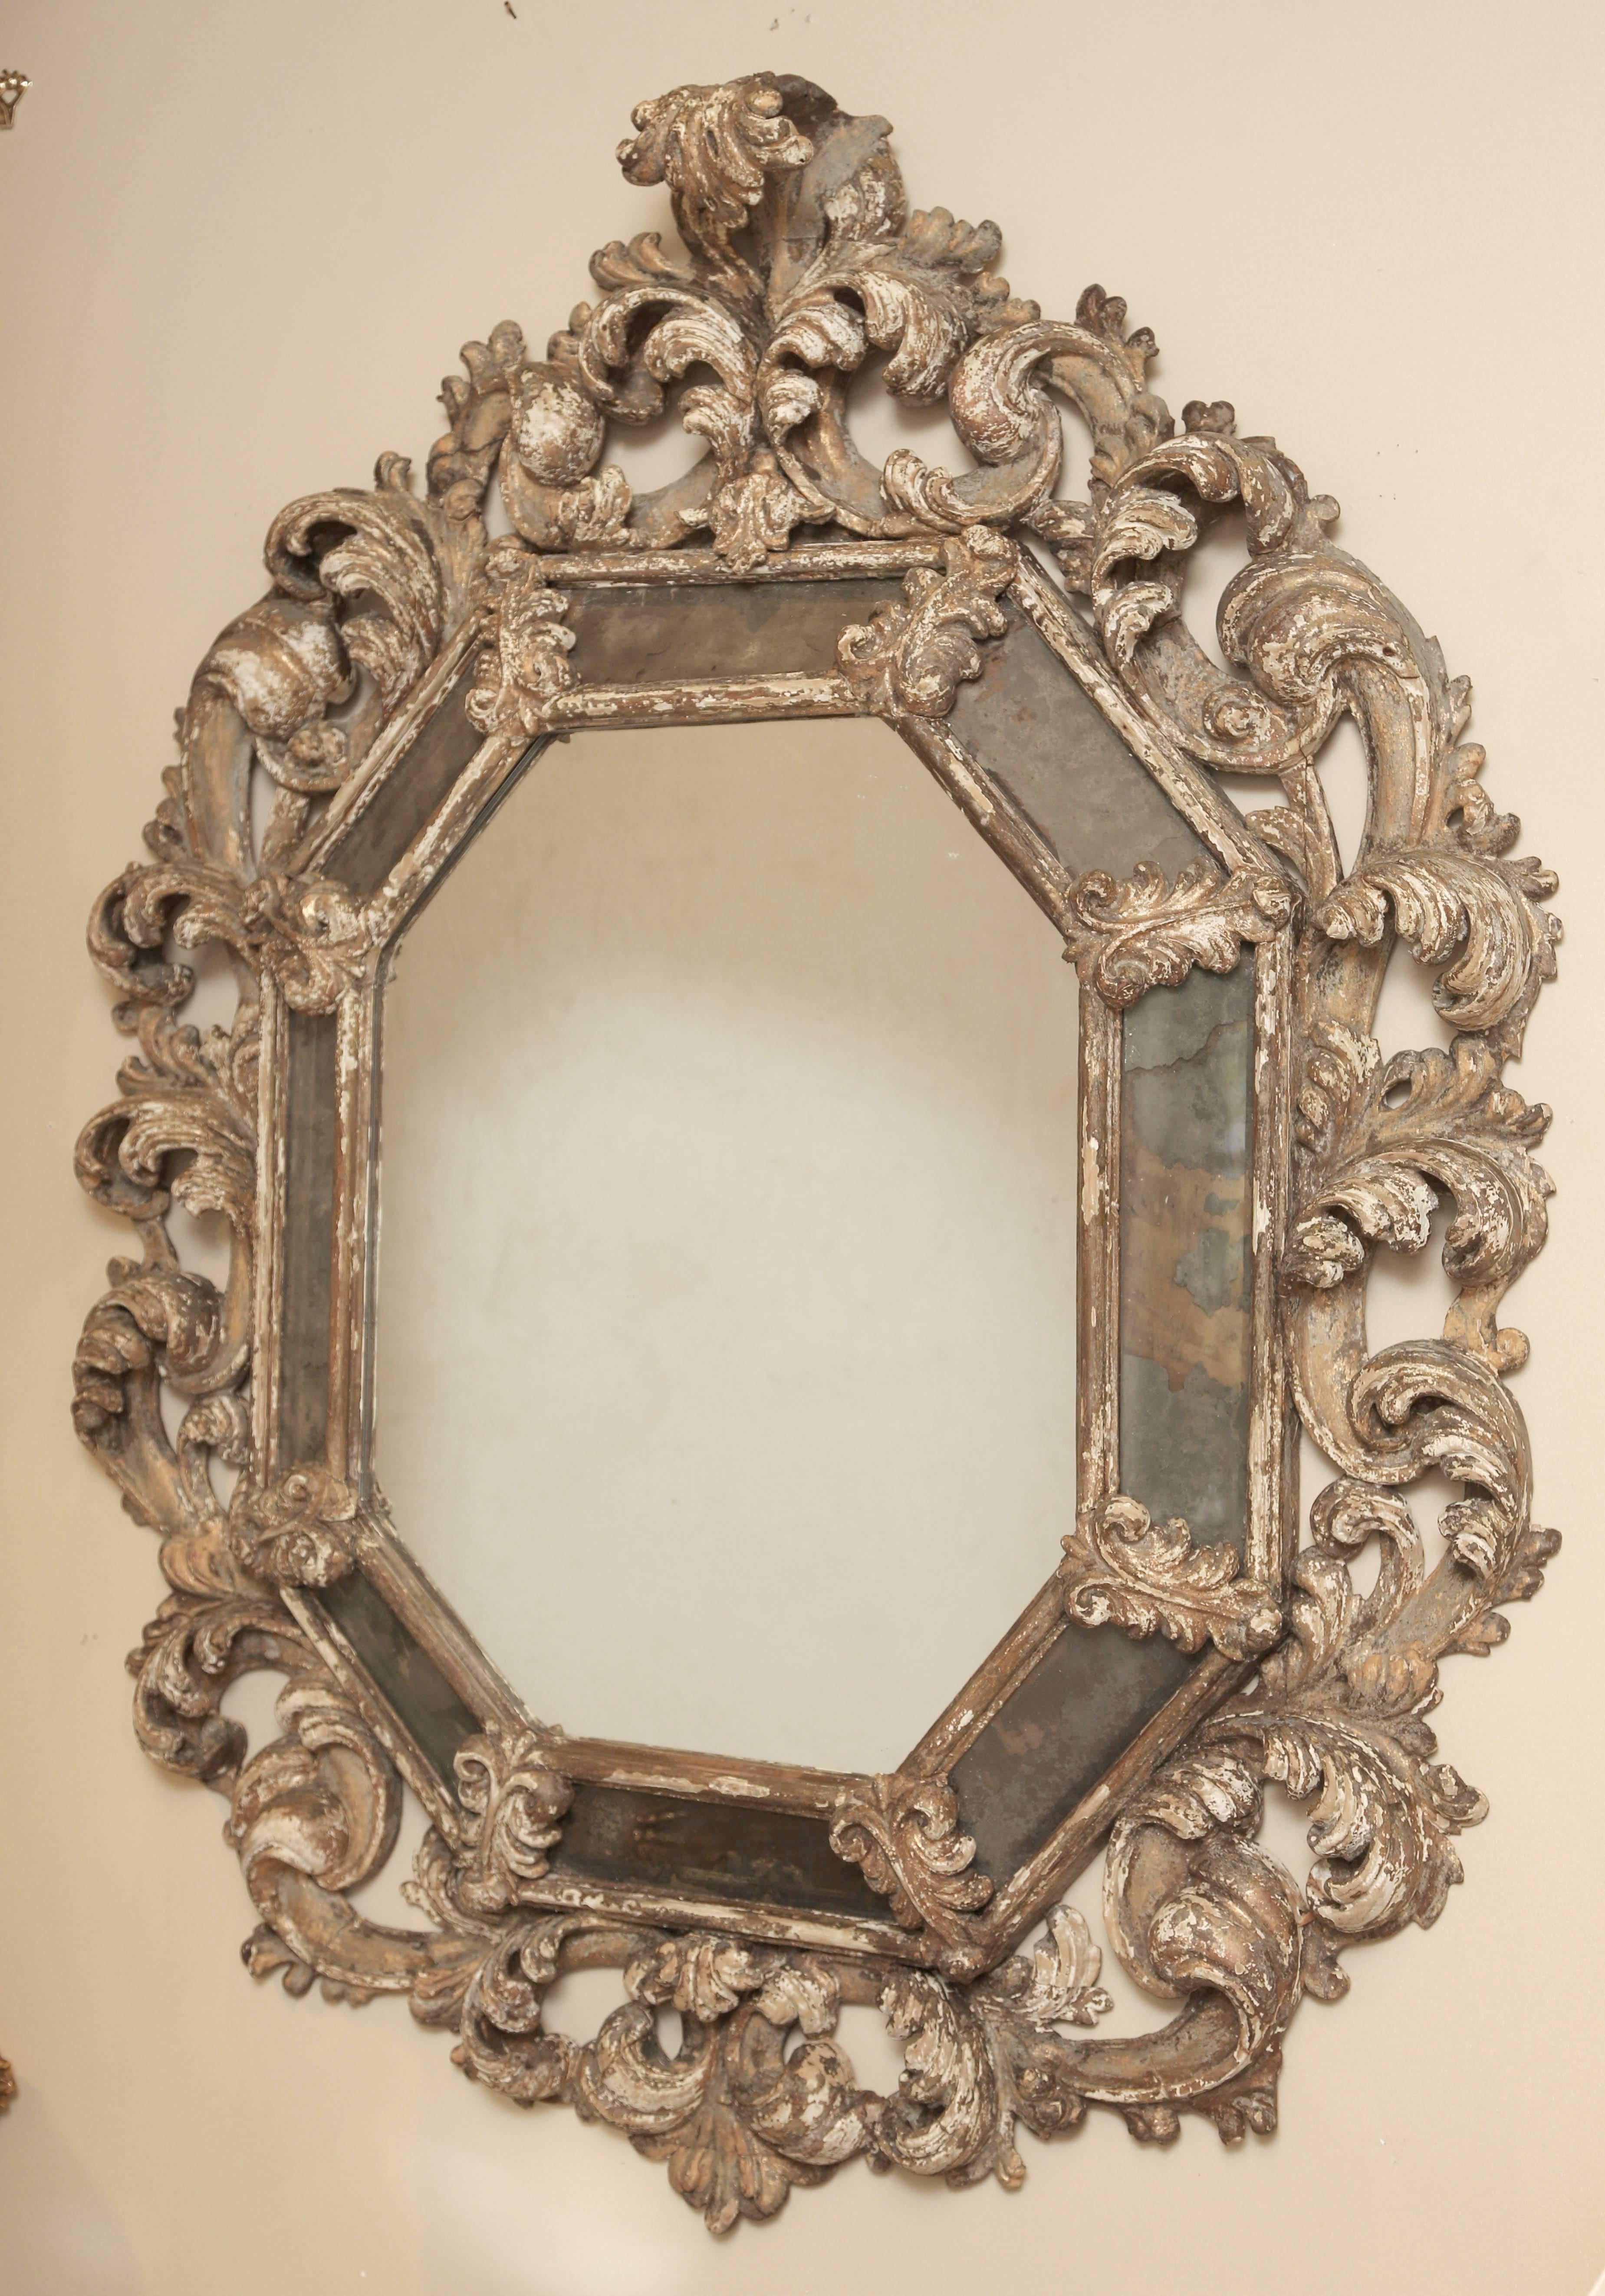 Mirror, of distressed painted and gessoed wood, having an octagonal mirror plate, bordered by original antique mirrored reliefs, surrounded by elaborately carved pierced foliate frame.

Stock ID: D3704